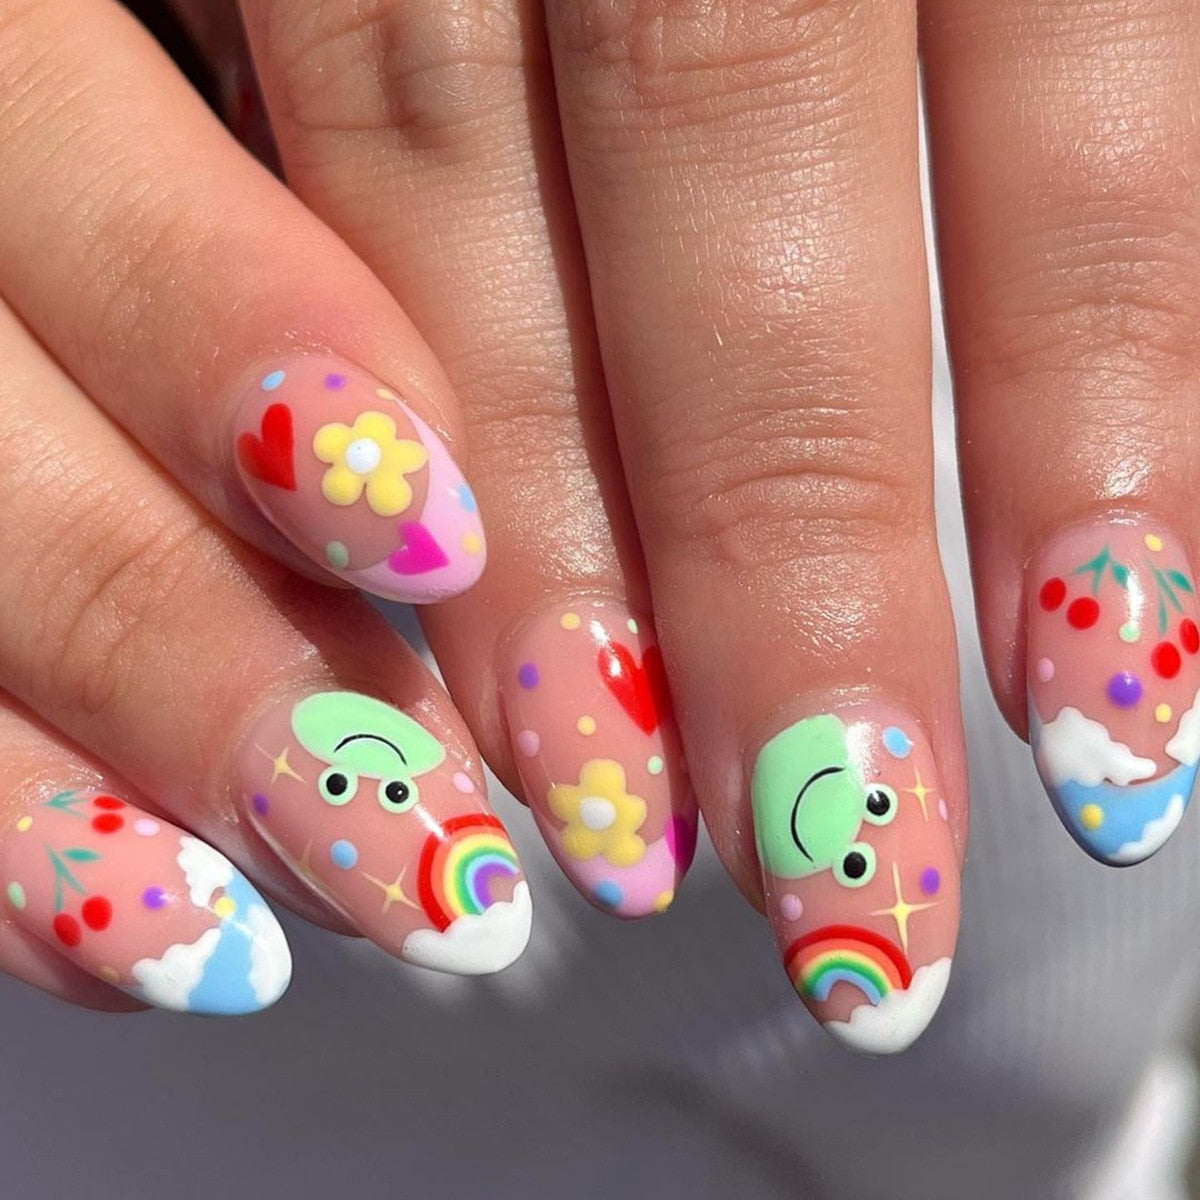 24pc Wearable Almond false nails with colorful rainbow design French ballet press on nails short artificial fake nails with glue Basso & Brooke